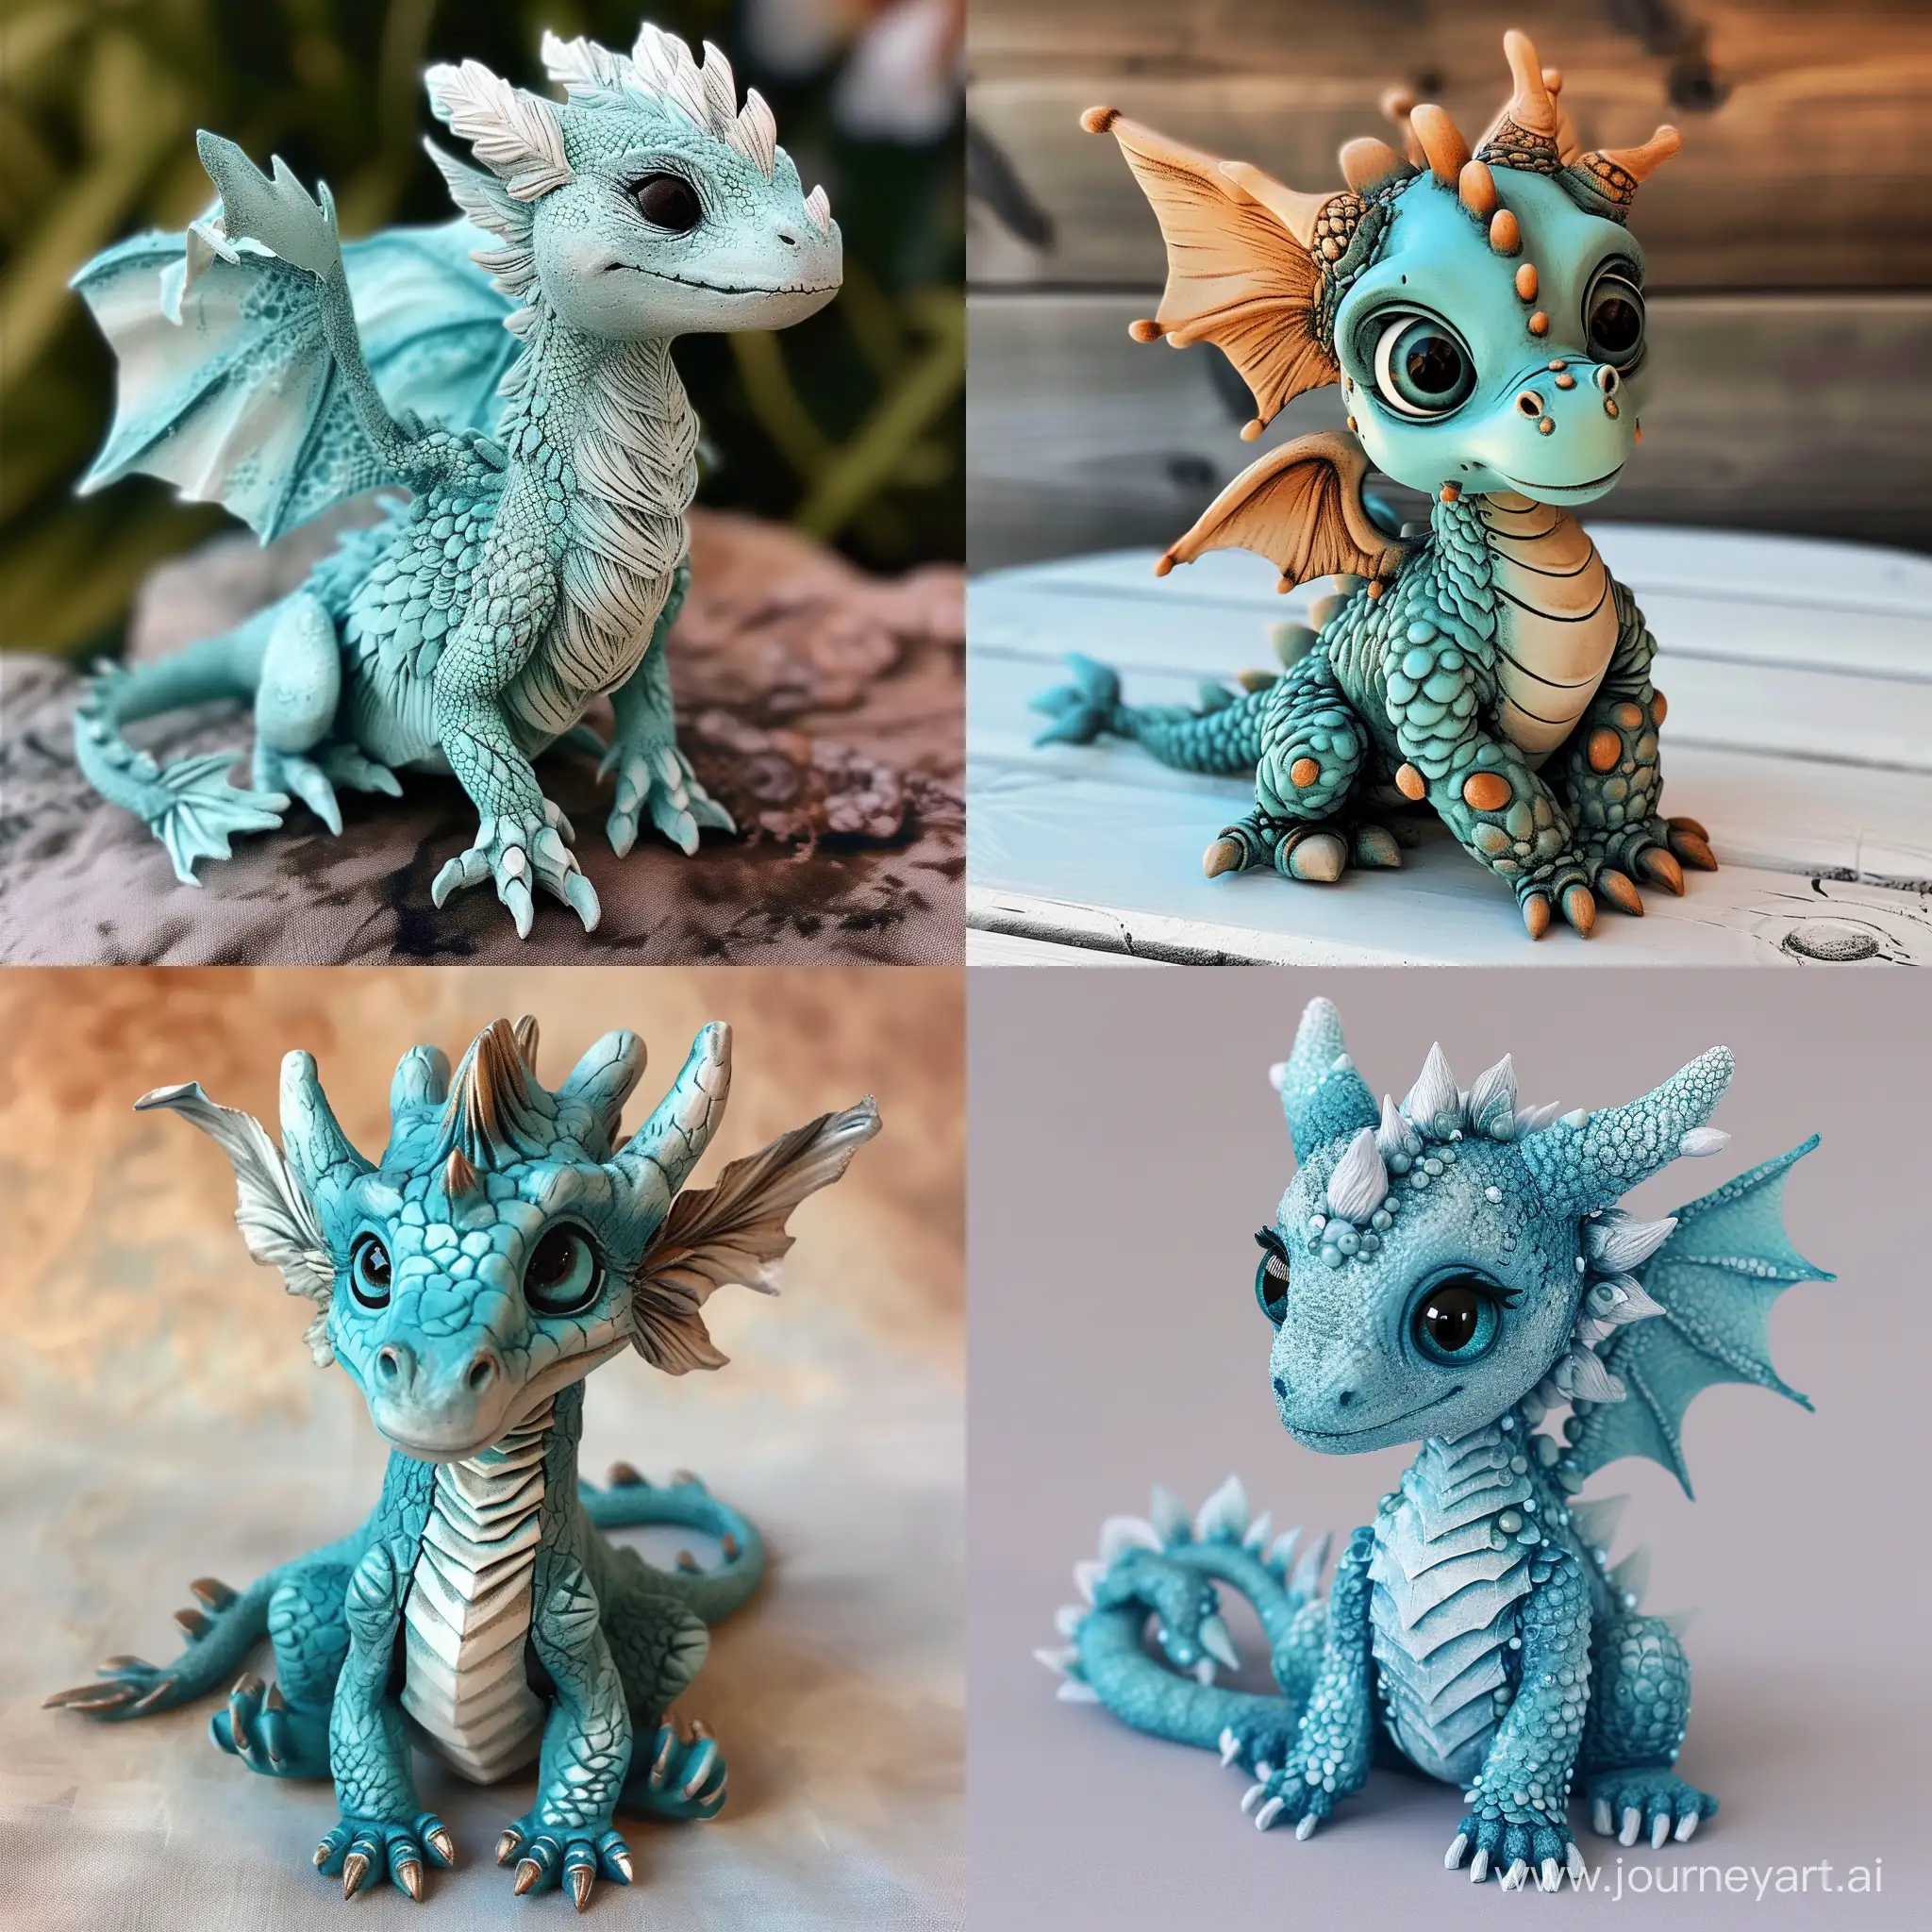 Adorable-Turquoise-Dragon-Art-Mythical-Creature-in-Vibrant-Colors